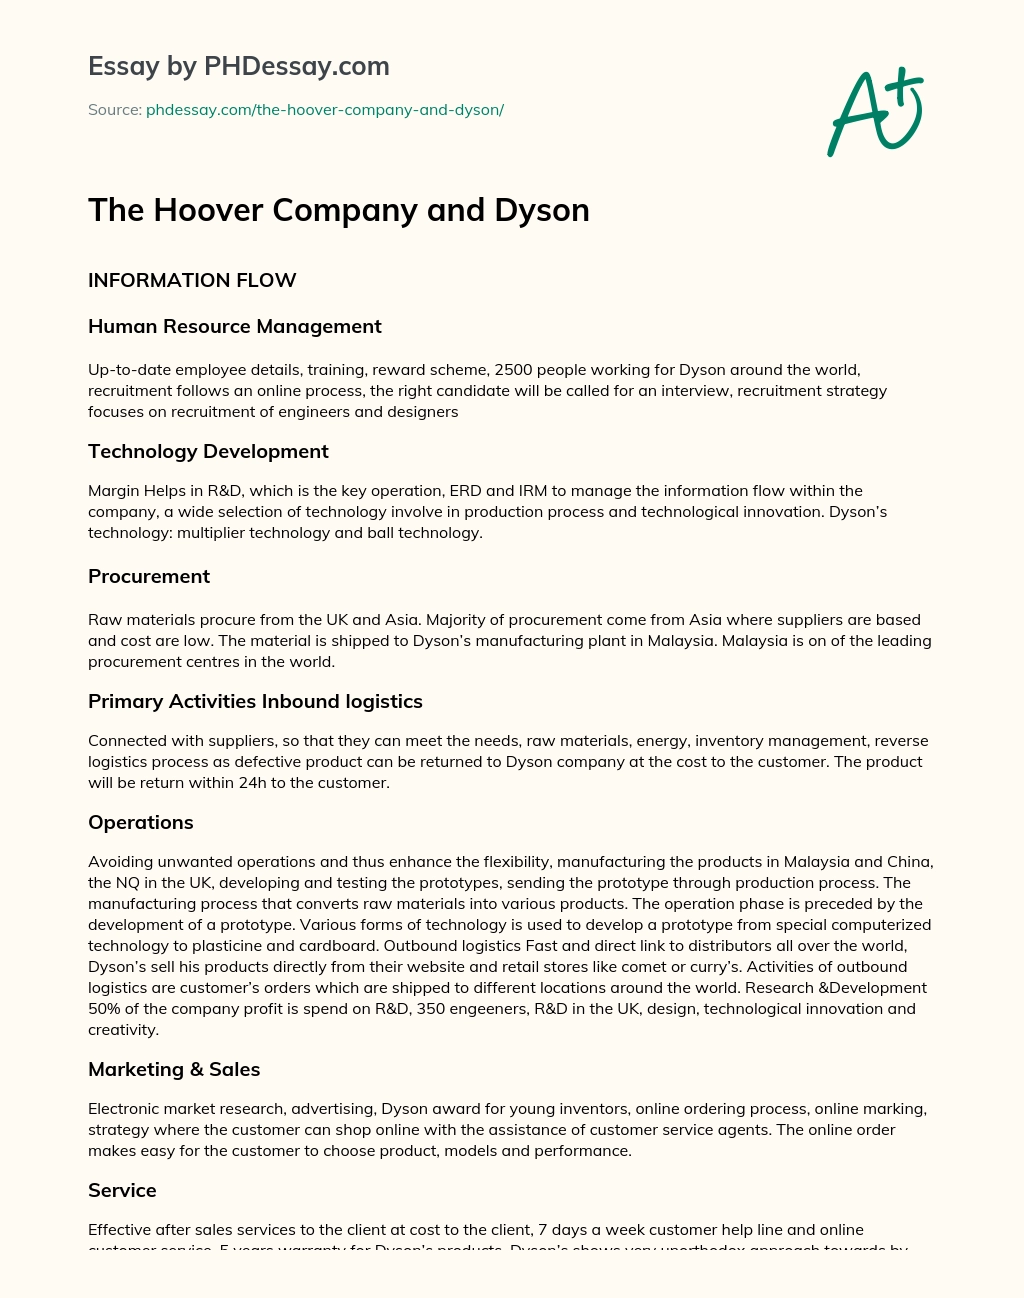 The Hoover Company and Dyson essay